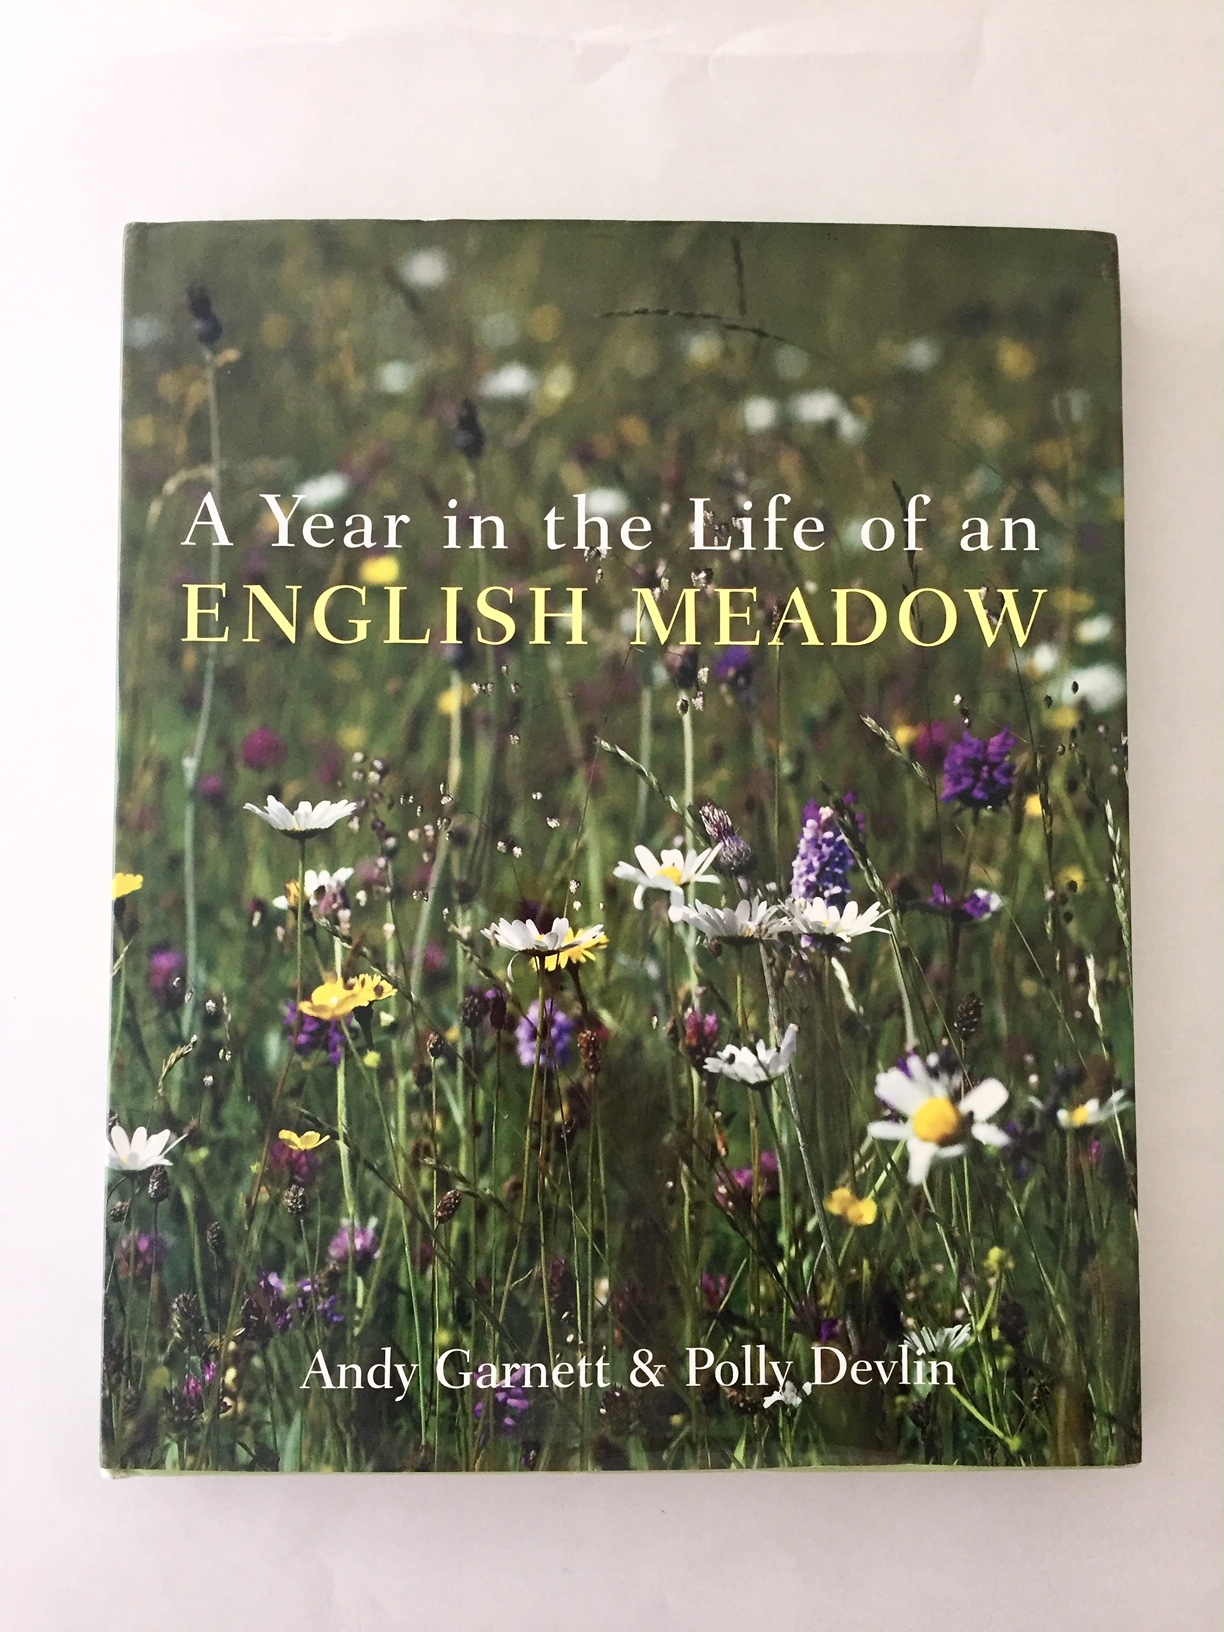 A Year in the lLife of an English Meadow, Andy Garnett and Polly Devlin